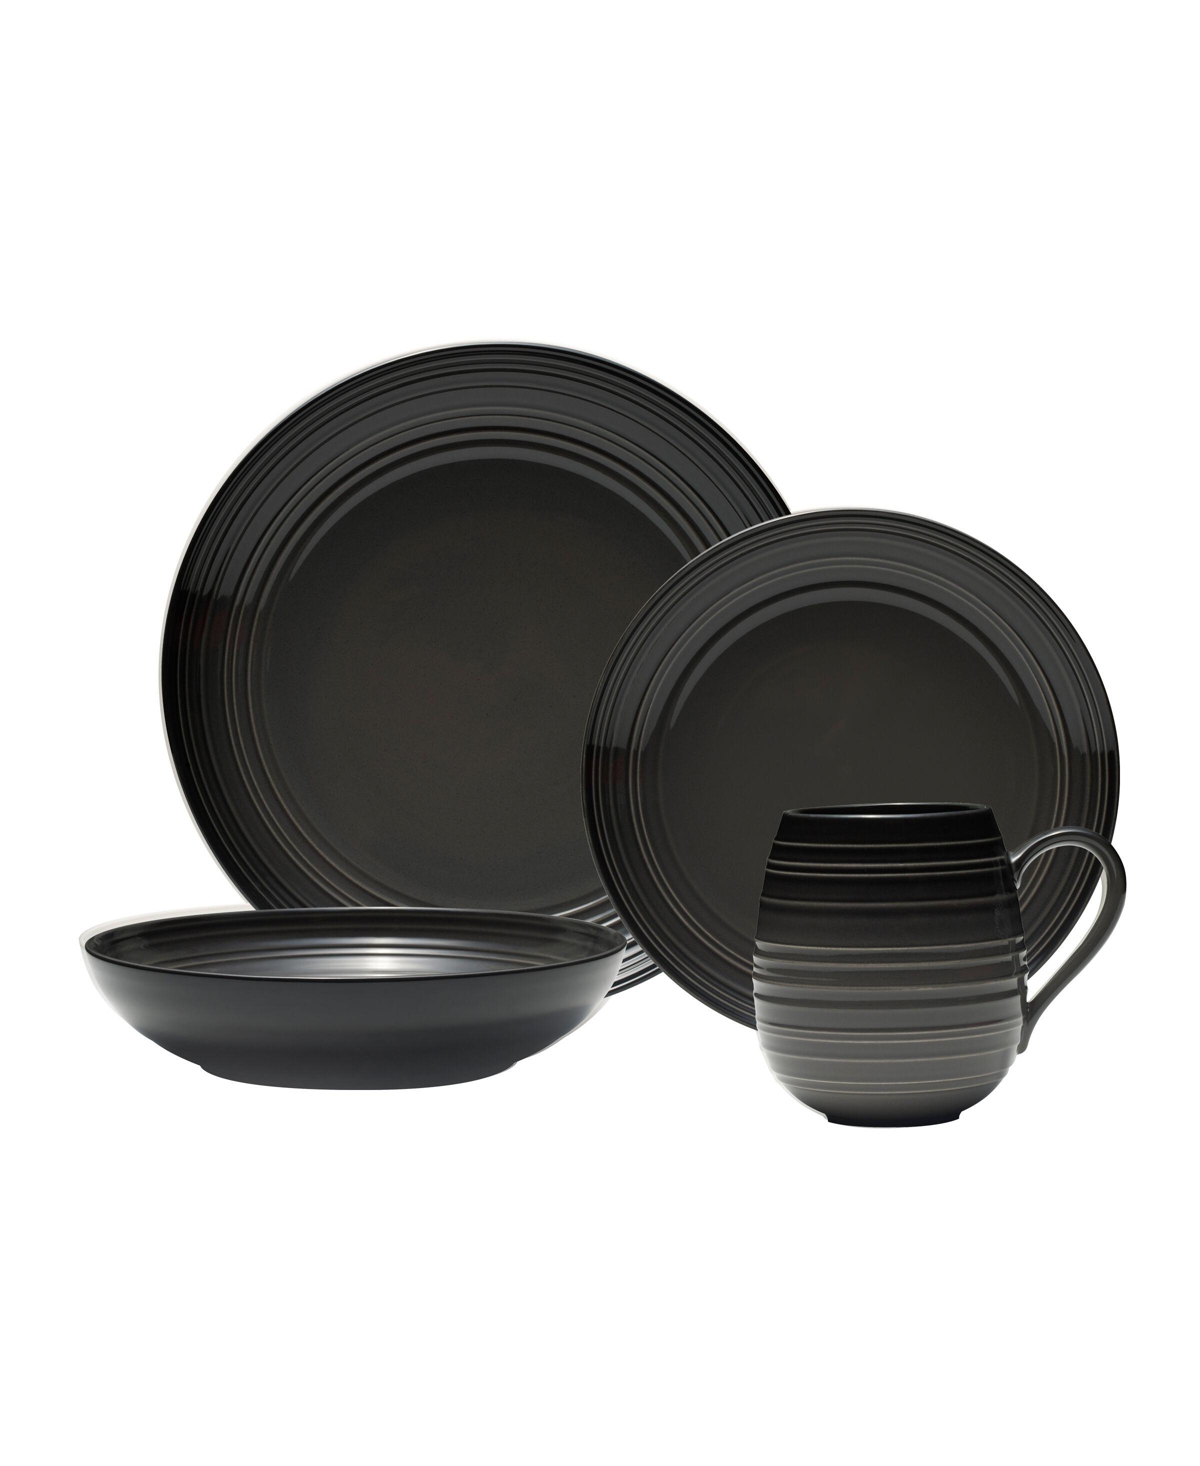 Swirl Graphite Coupe 4 Piece Place Setting - Gray